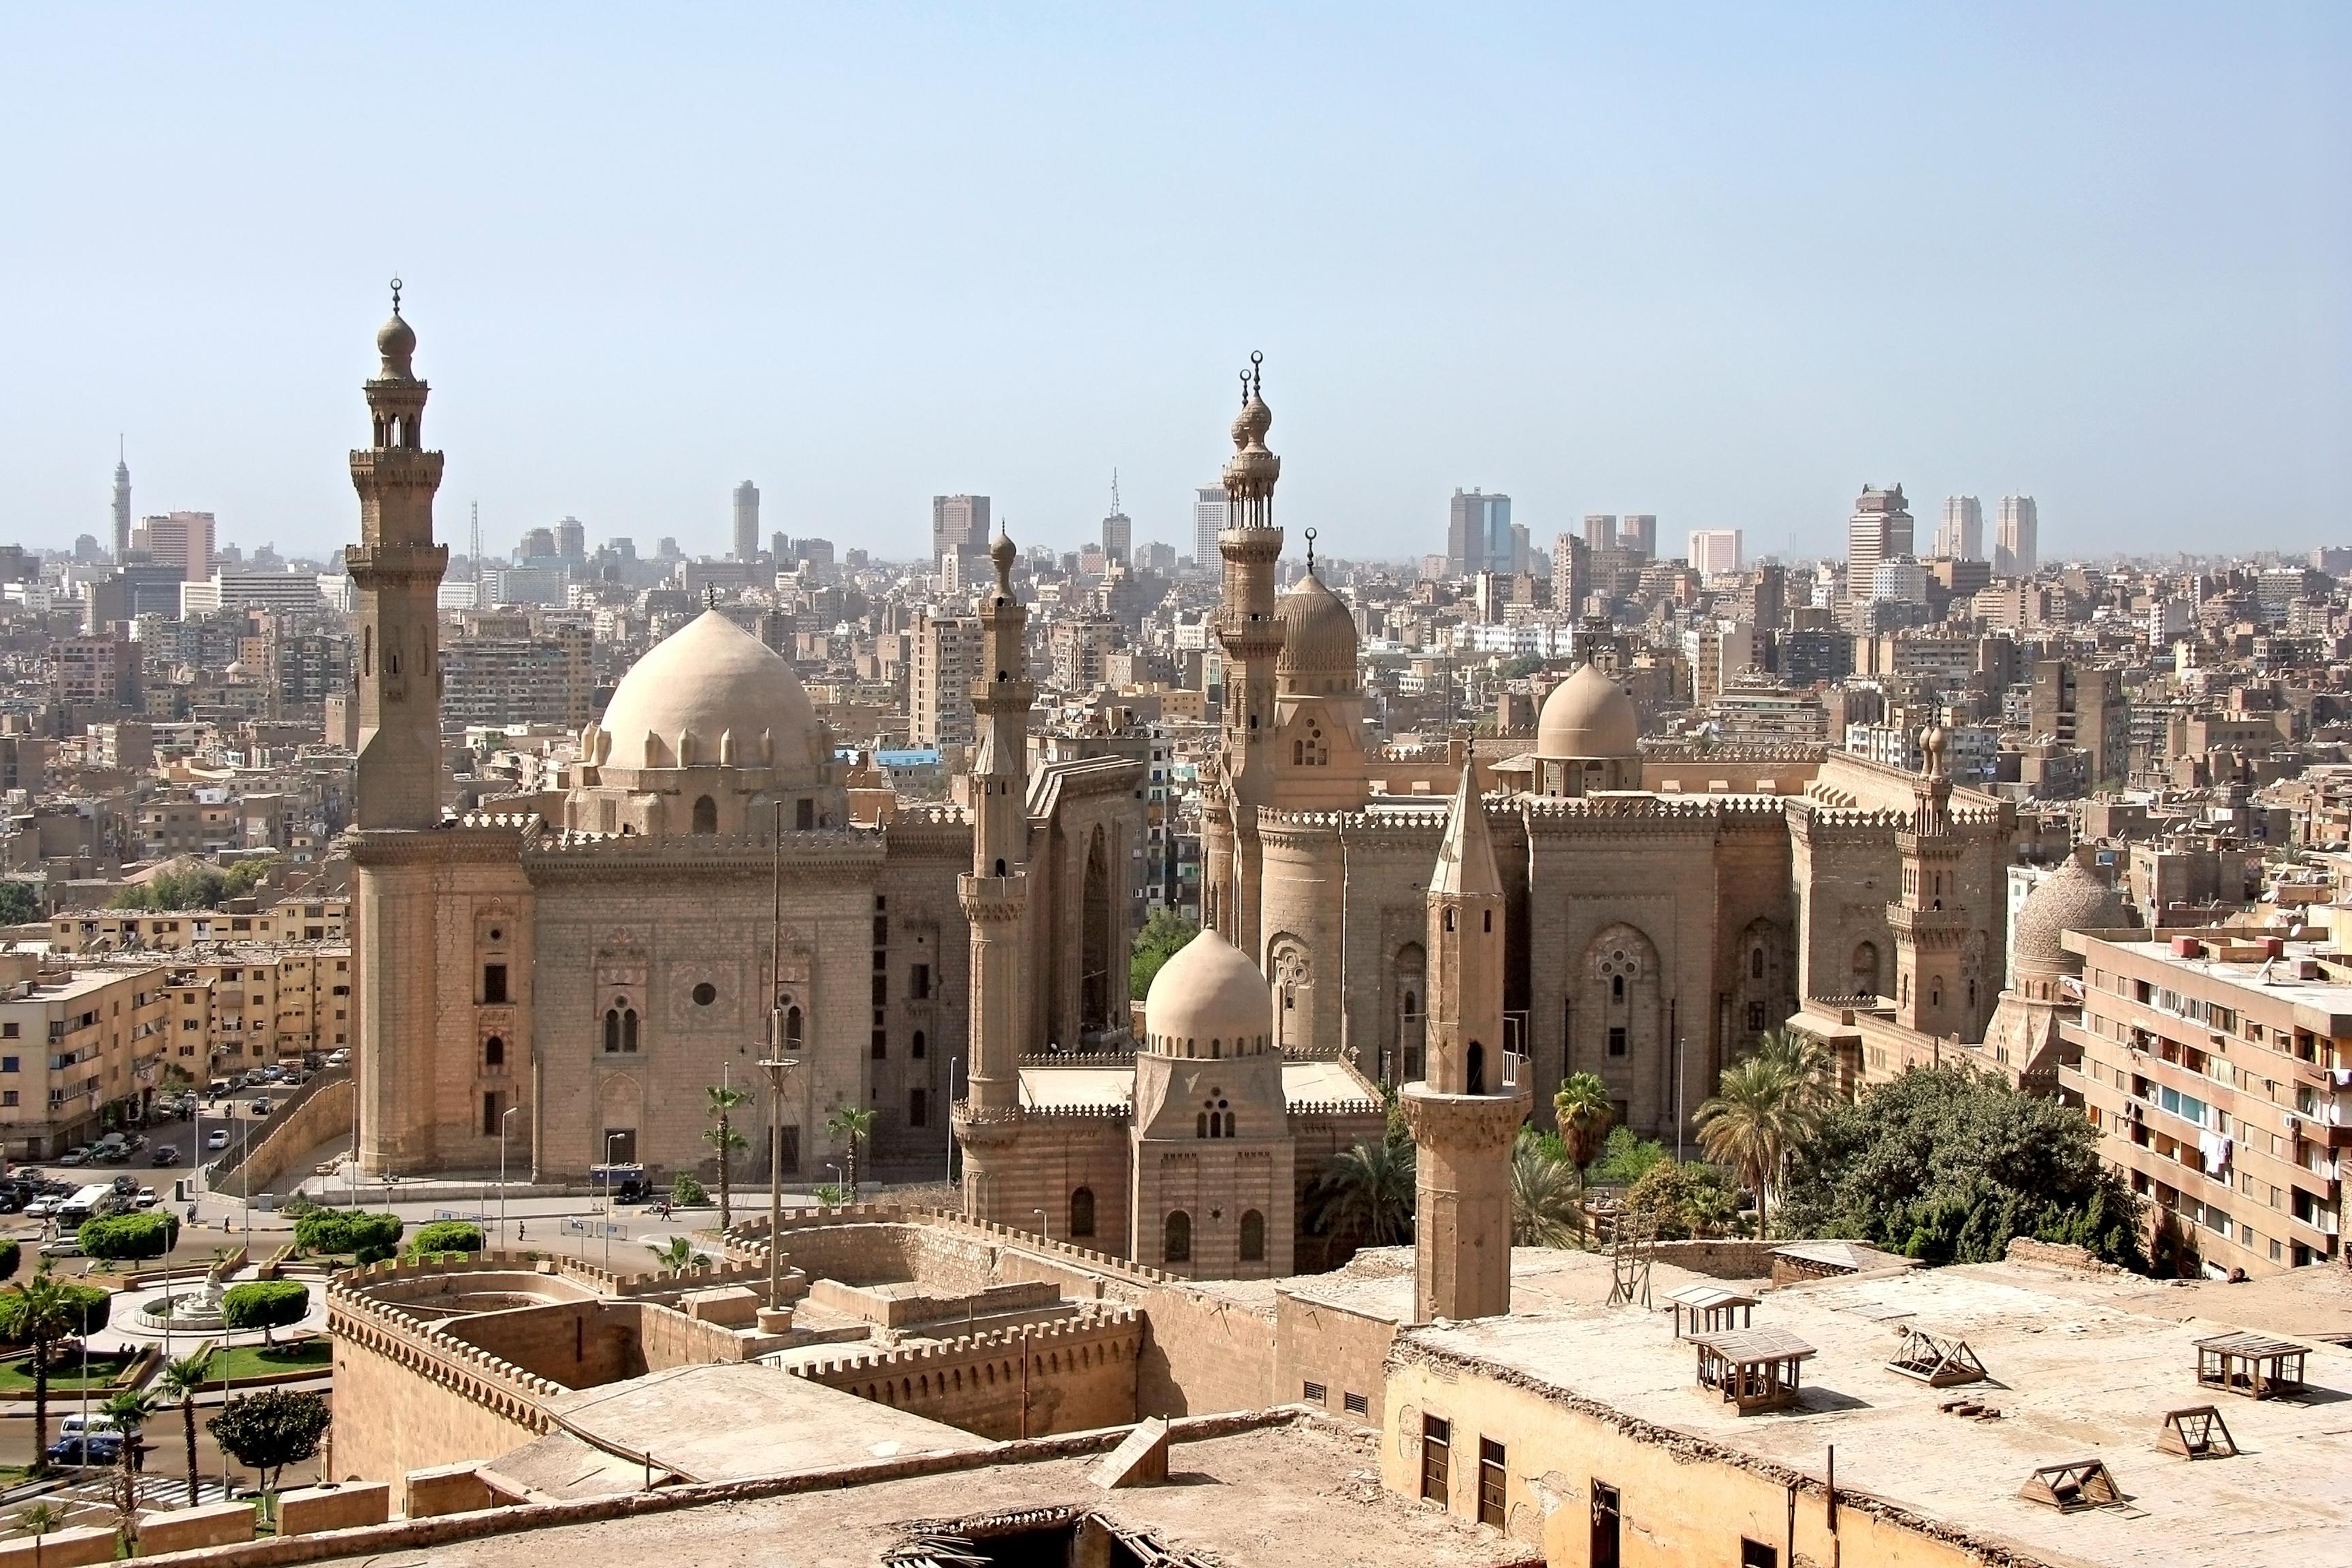 The Cairo city, cover photo